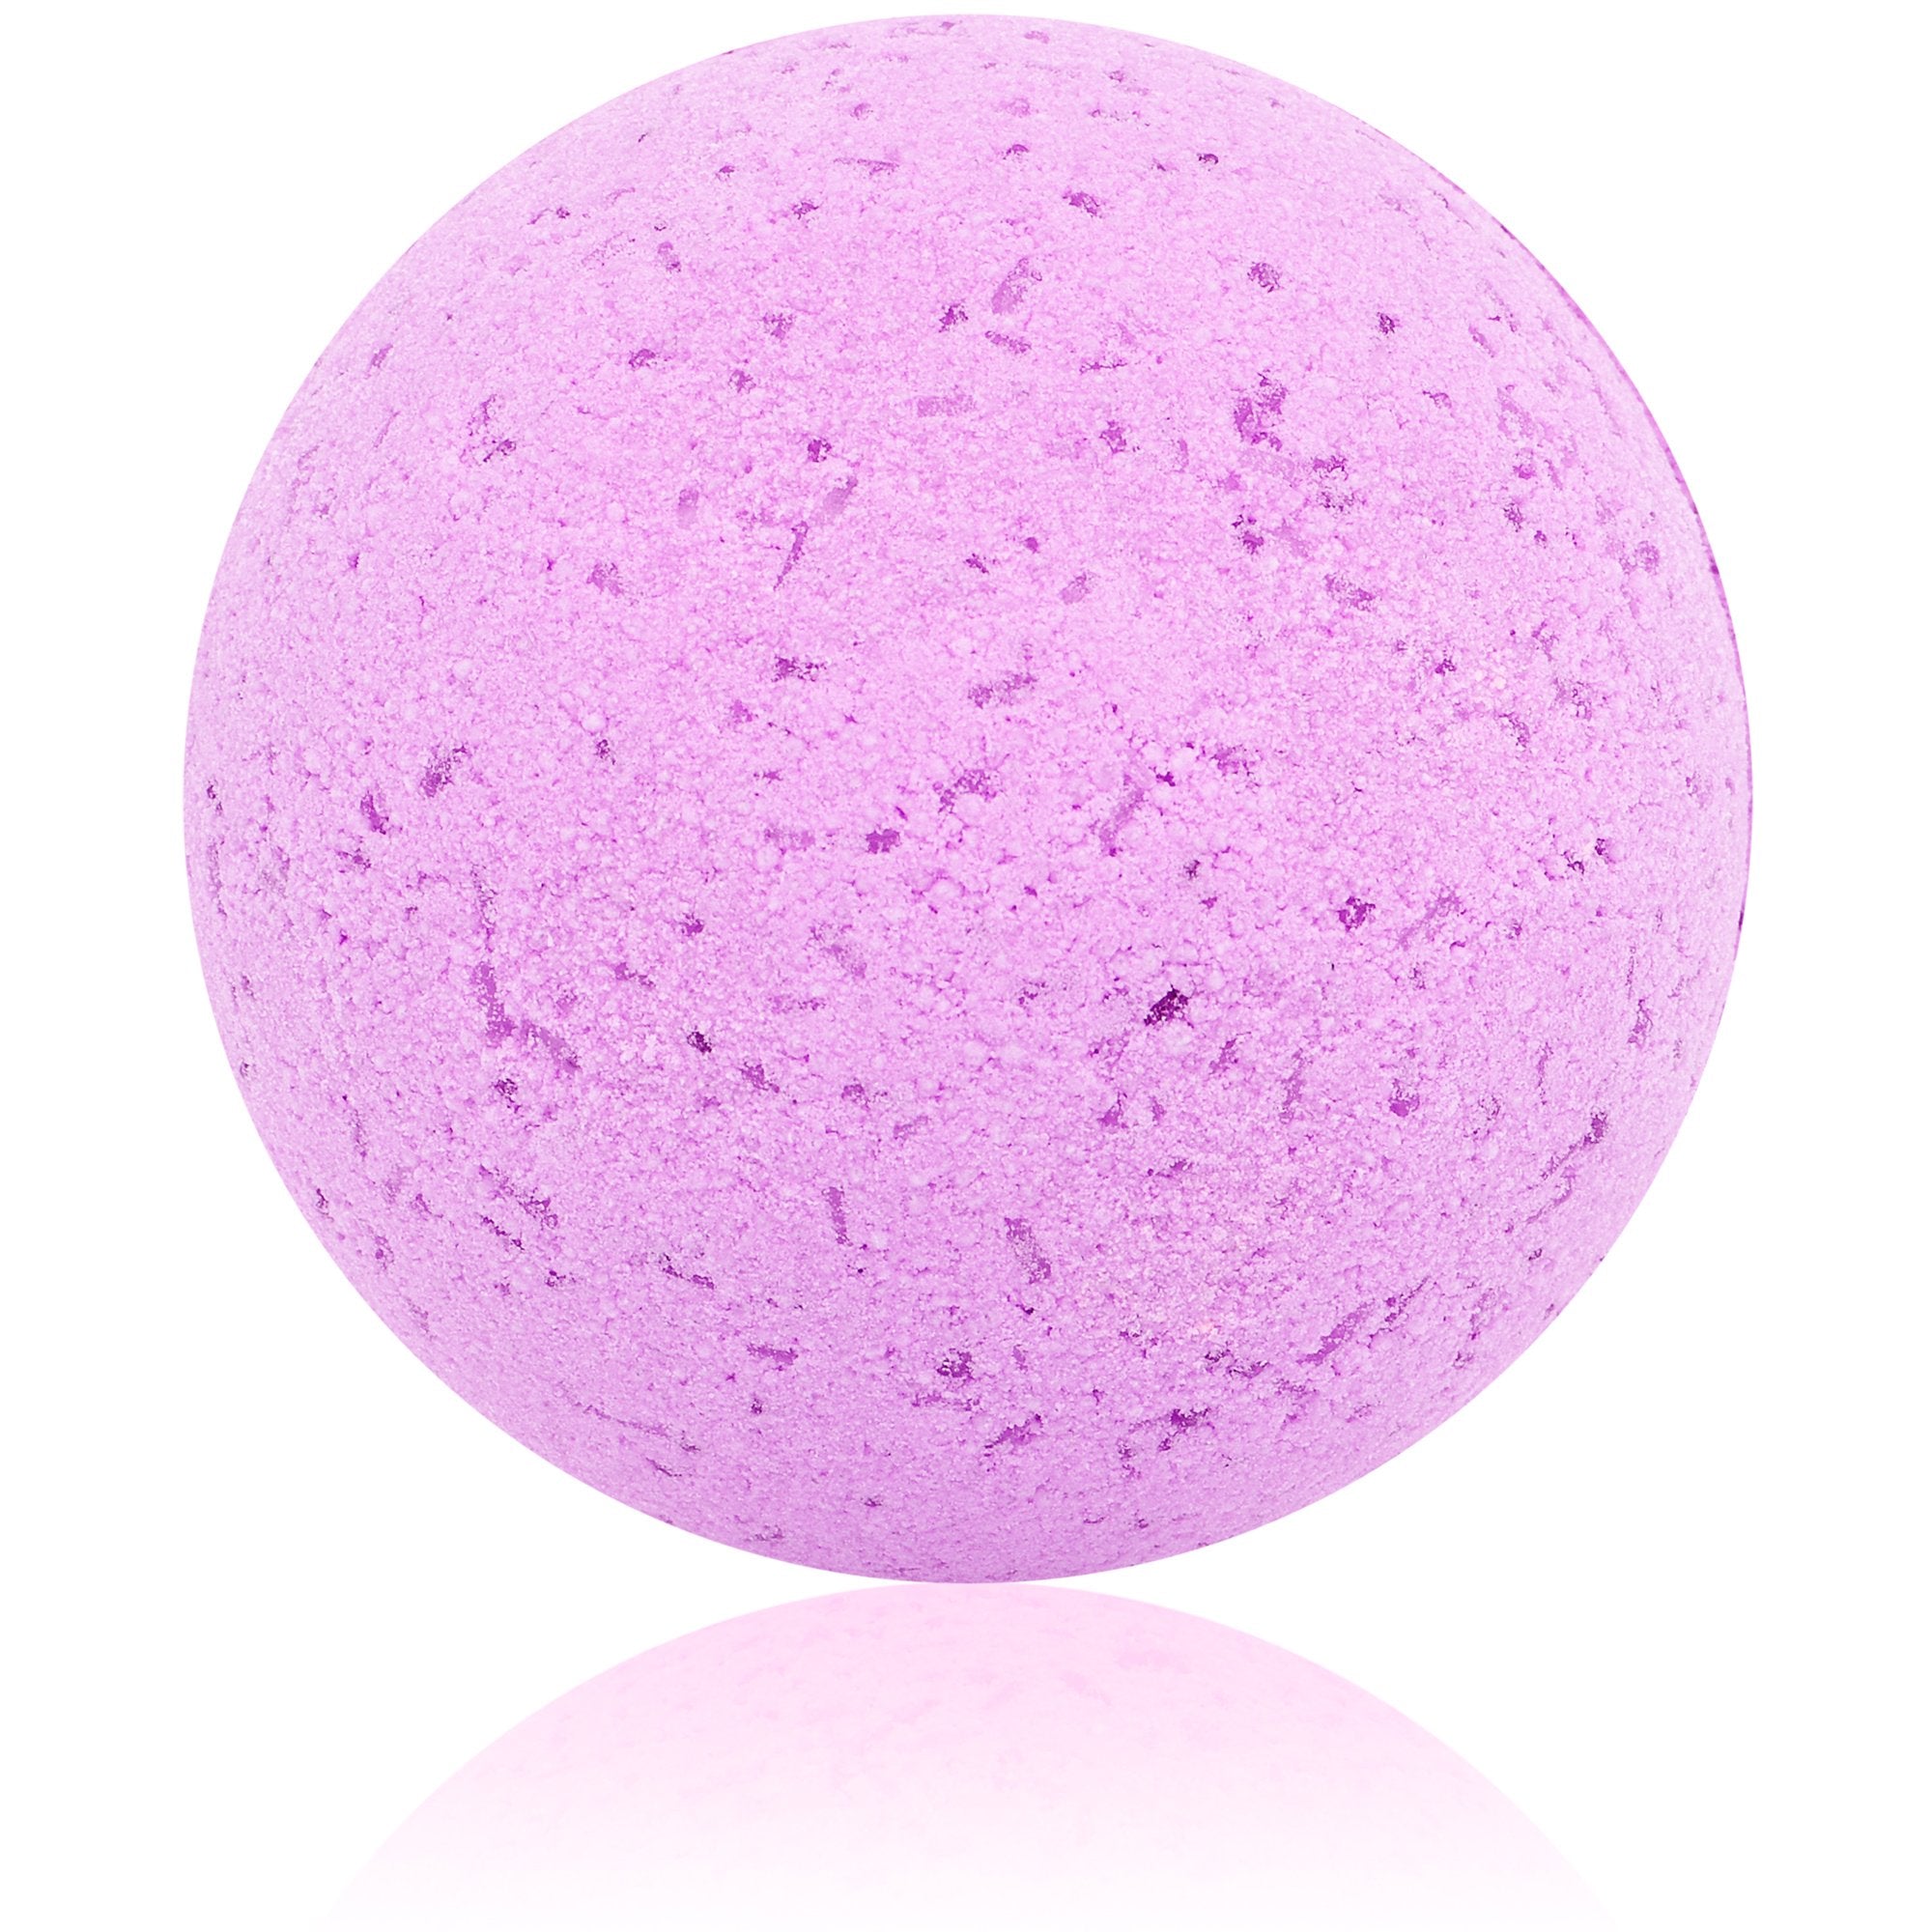 Hibiscus Bath Bomb with Jewelry Ring Inside